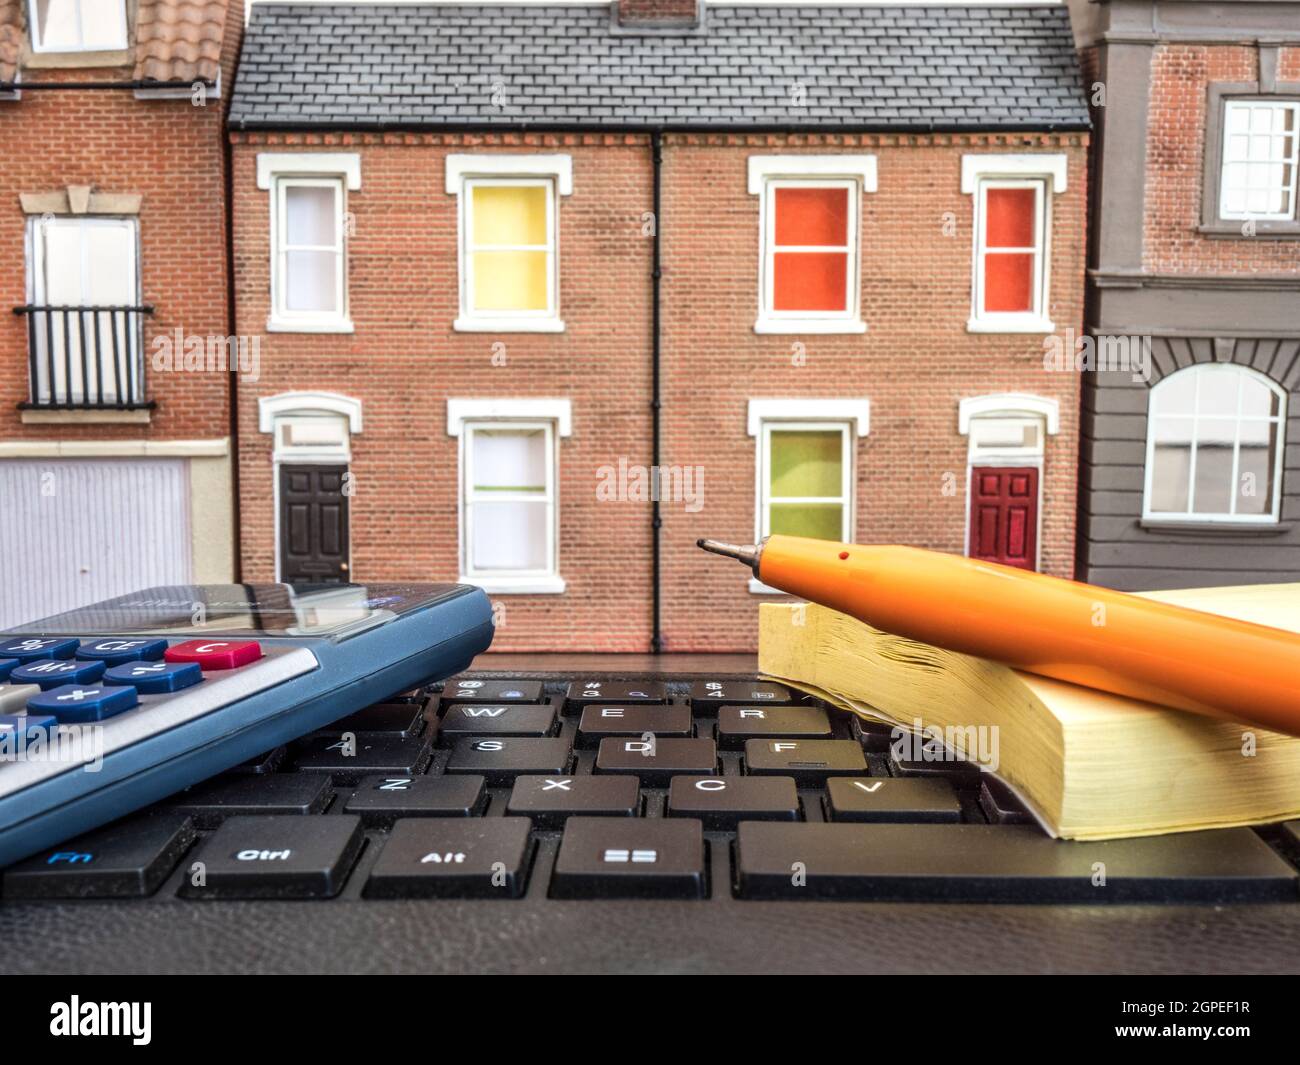 Realtor / estate agent concept: A portable keyboard in front of a line of model / toy buildings, with calculator, pen and note pad. Stock Photo